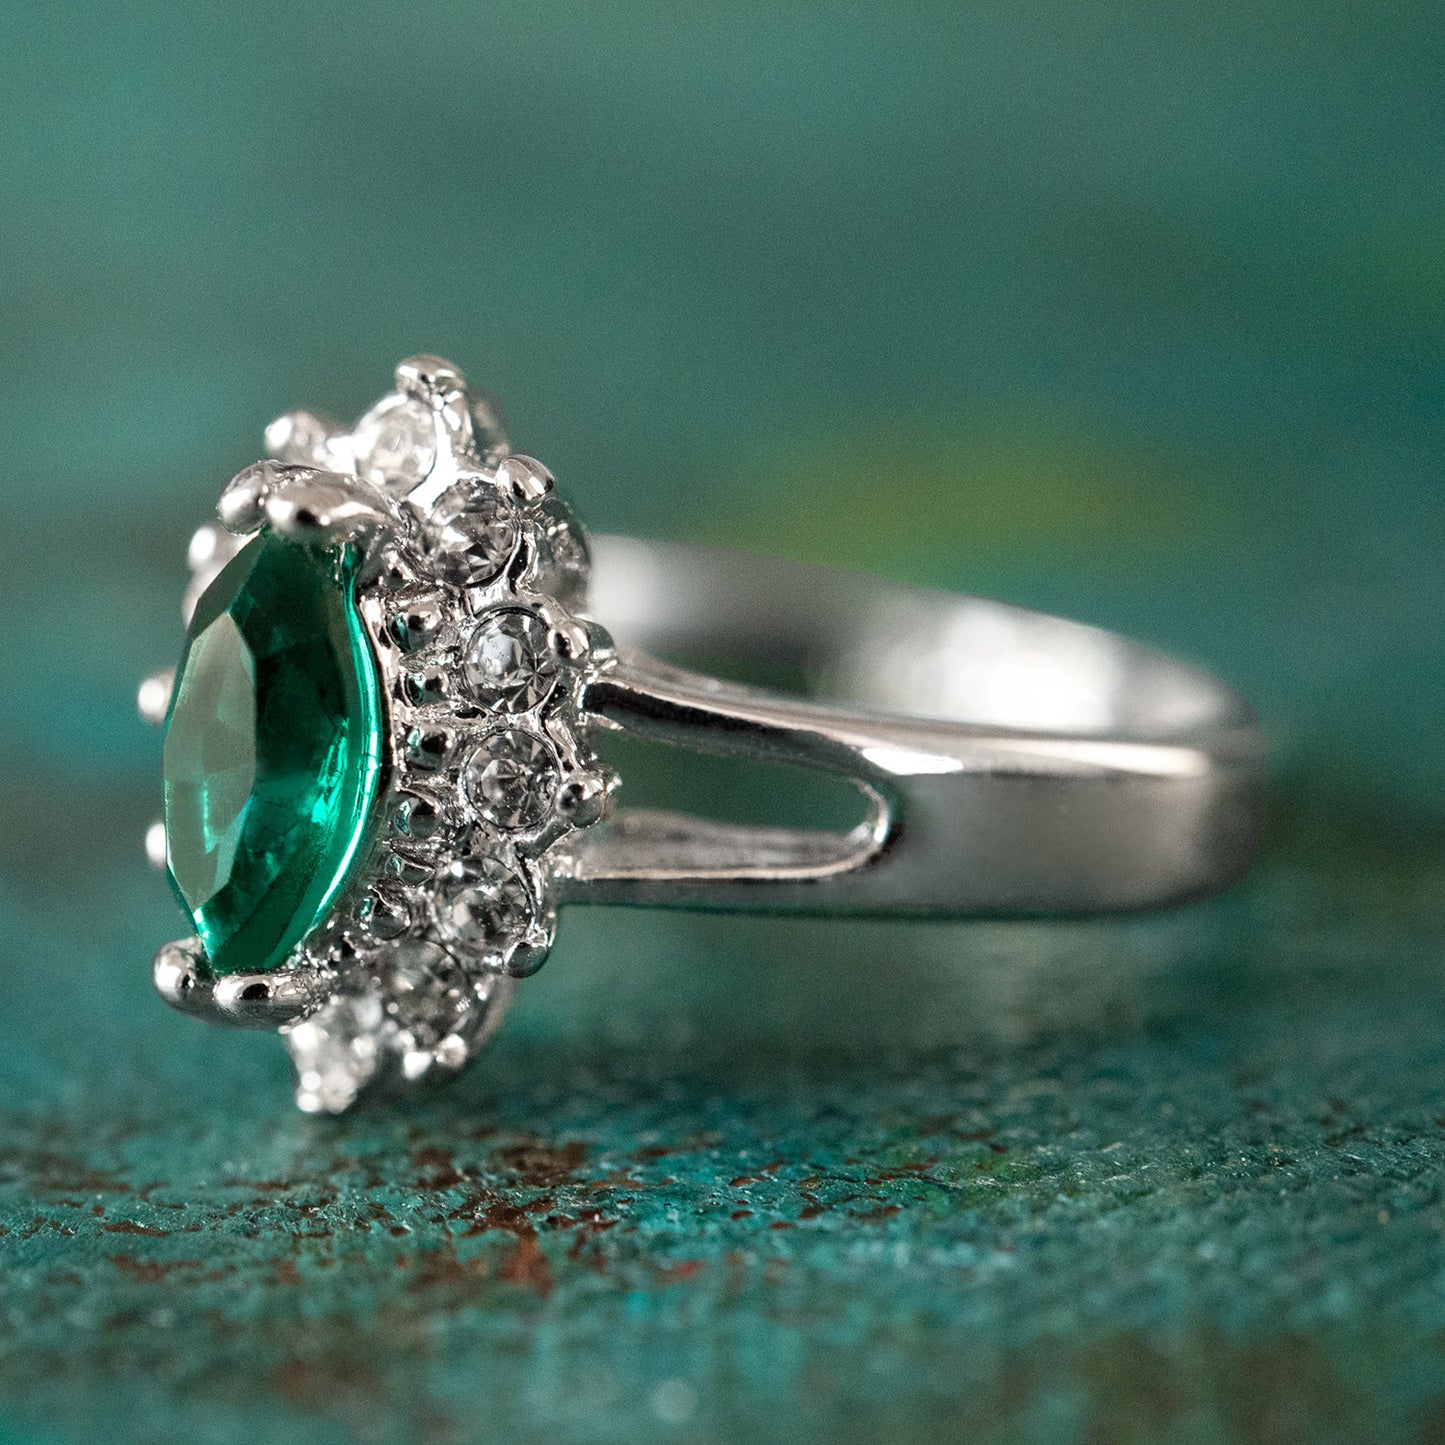 Vintage Ring Emerald and Clear Swarovski Crystals 18kt White Gold Silver  R1314 - Limited Stock - Never Worn